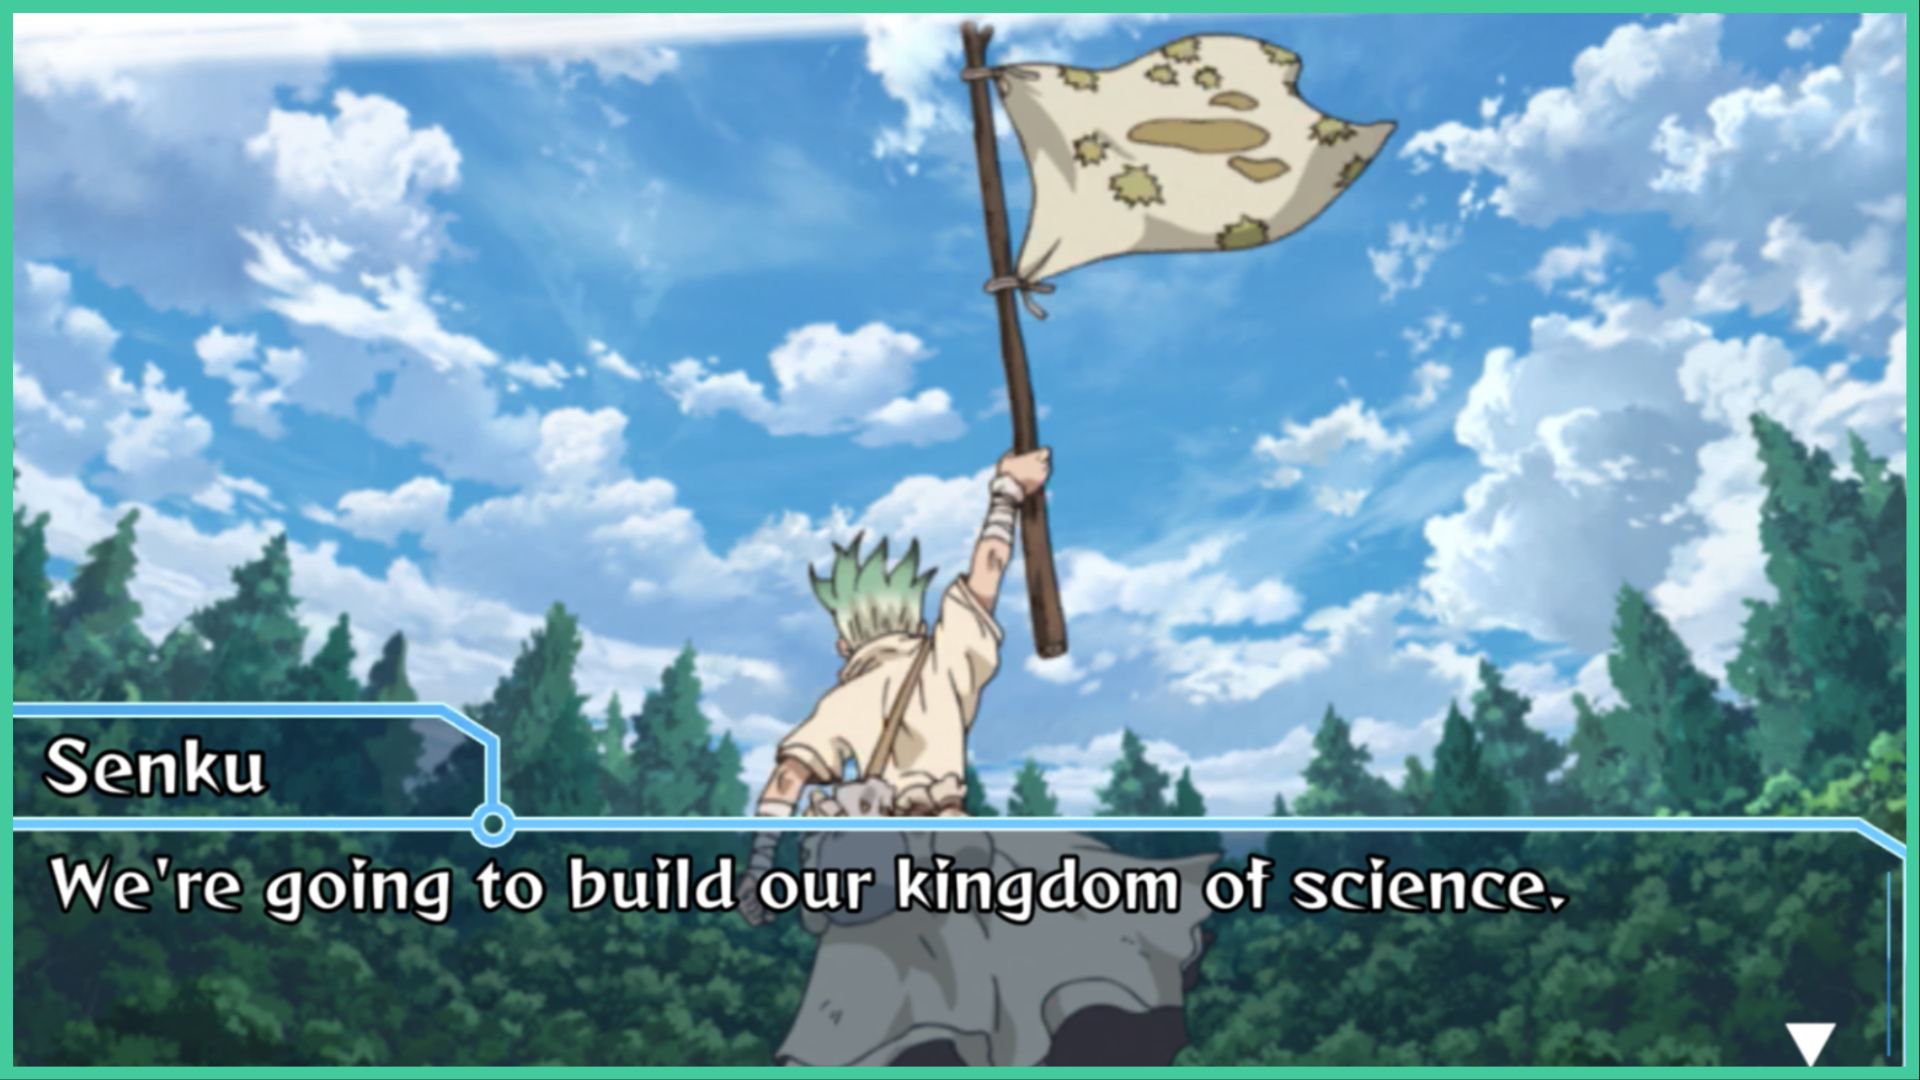 feature image for our dr.stone battle craft tier list, the image features a screenshot from a cutscene from the game of senku, the main character, holding a flag up to the sky as he's surrounded by tall trees in the forest, there's a dialogue box that reads "we're going to build our kingdom of science"